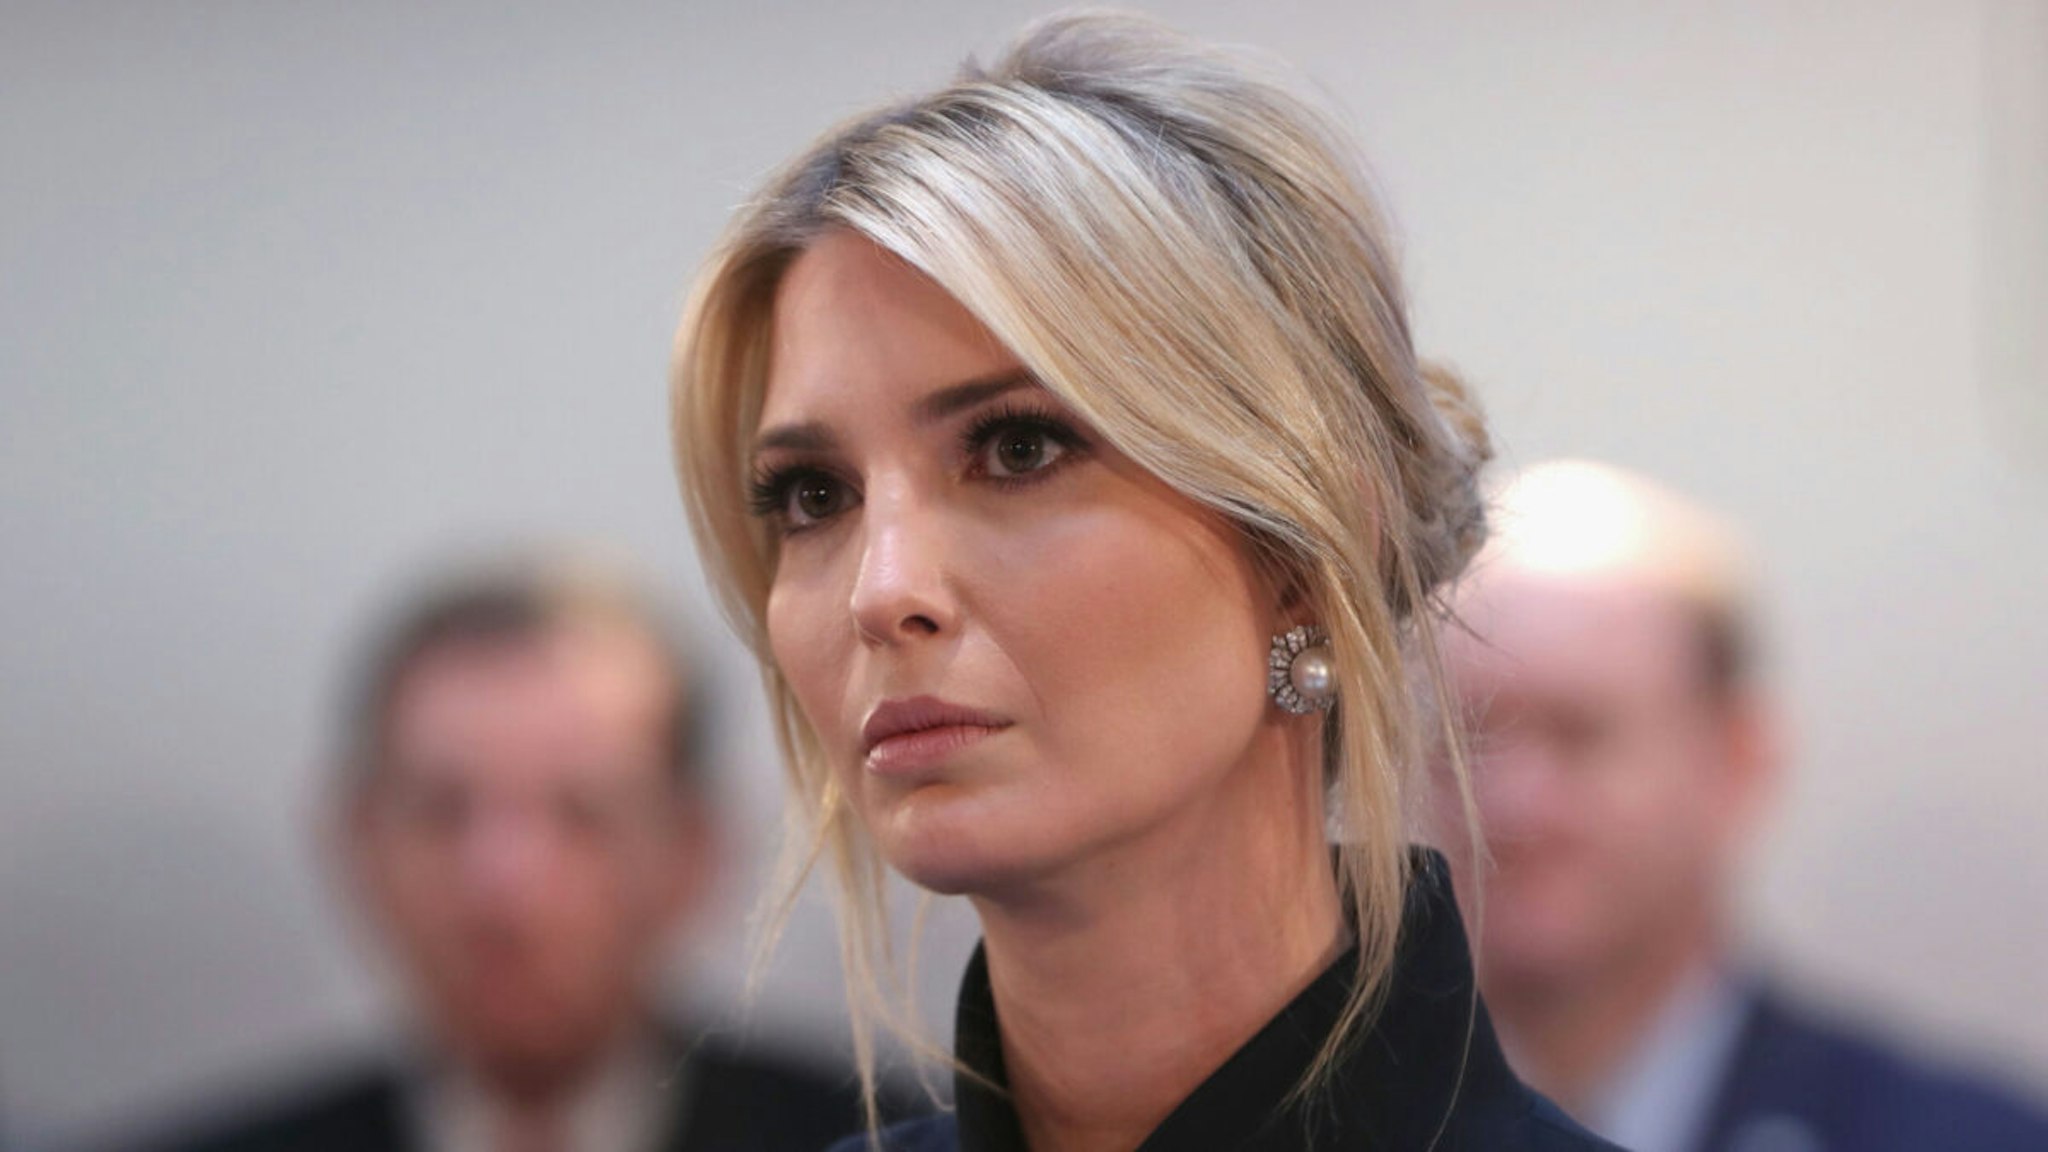 Ivanka Trump, daughter of US president Donald Trump, attends a panel discussion at the 55th Munich Security Conference (MSC) on February 16, 2019 in Munich, Germany.